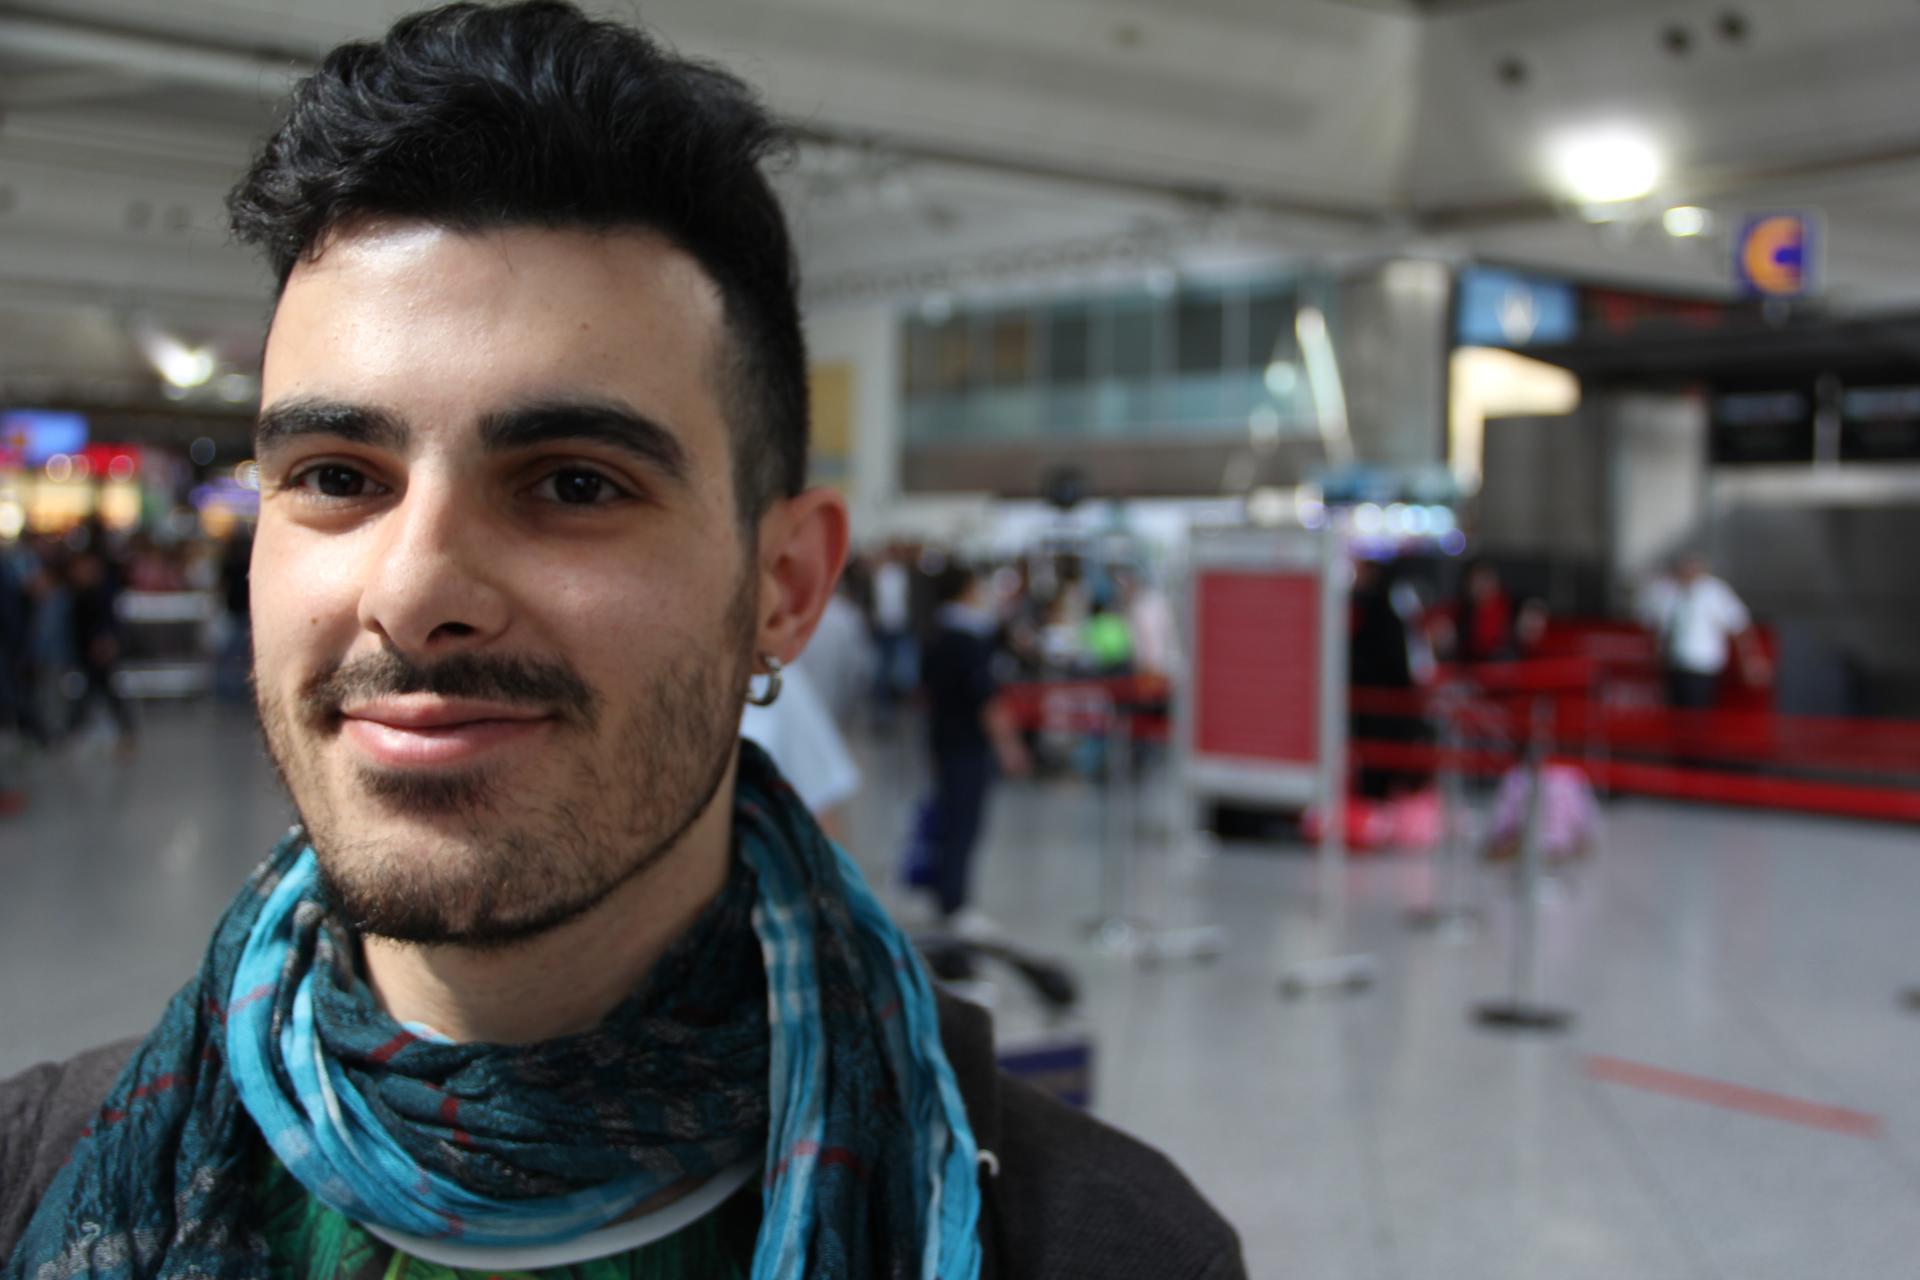 Subhi Nahas is a gay refugee from the Syrian city of Idlib.